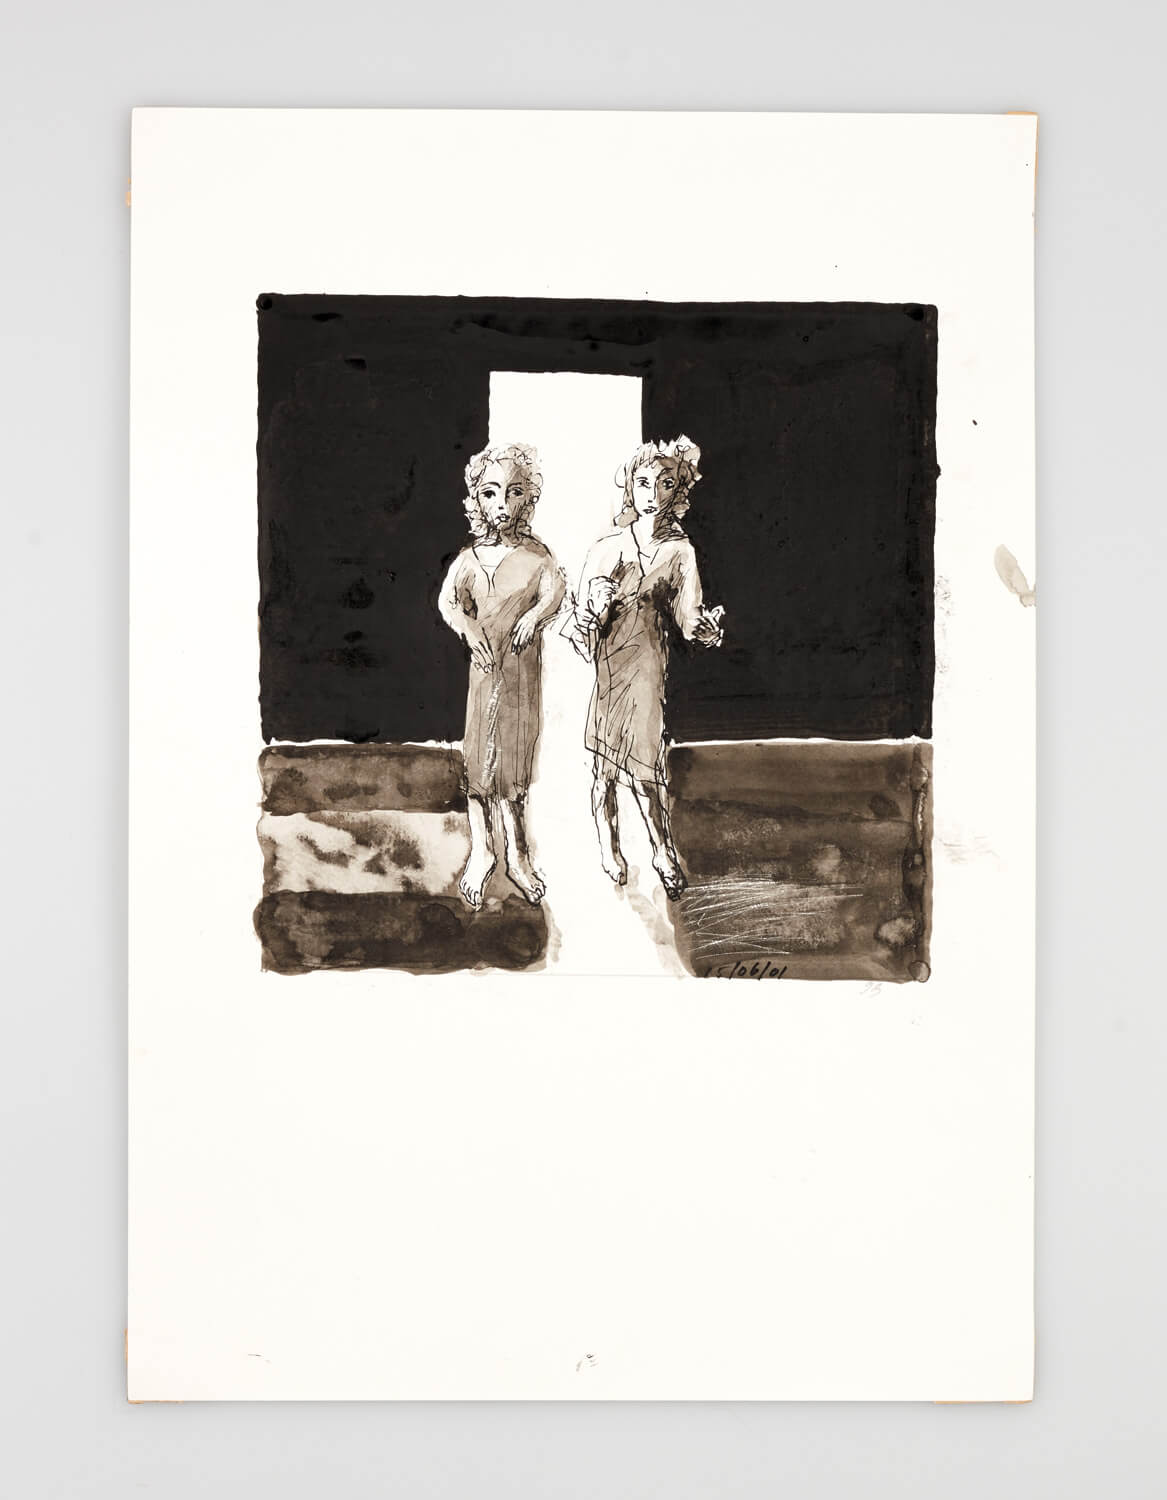 JB007 - Two Women: It looks perfect - 2001 - 50 x 35 cm - Indian ink and wash on paper